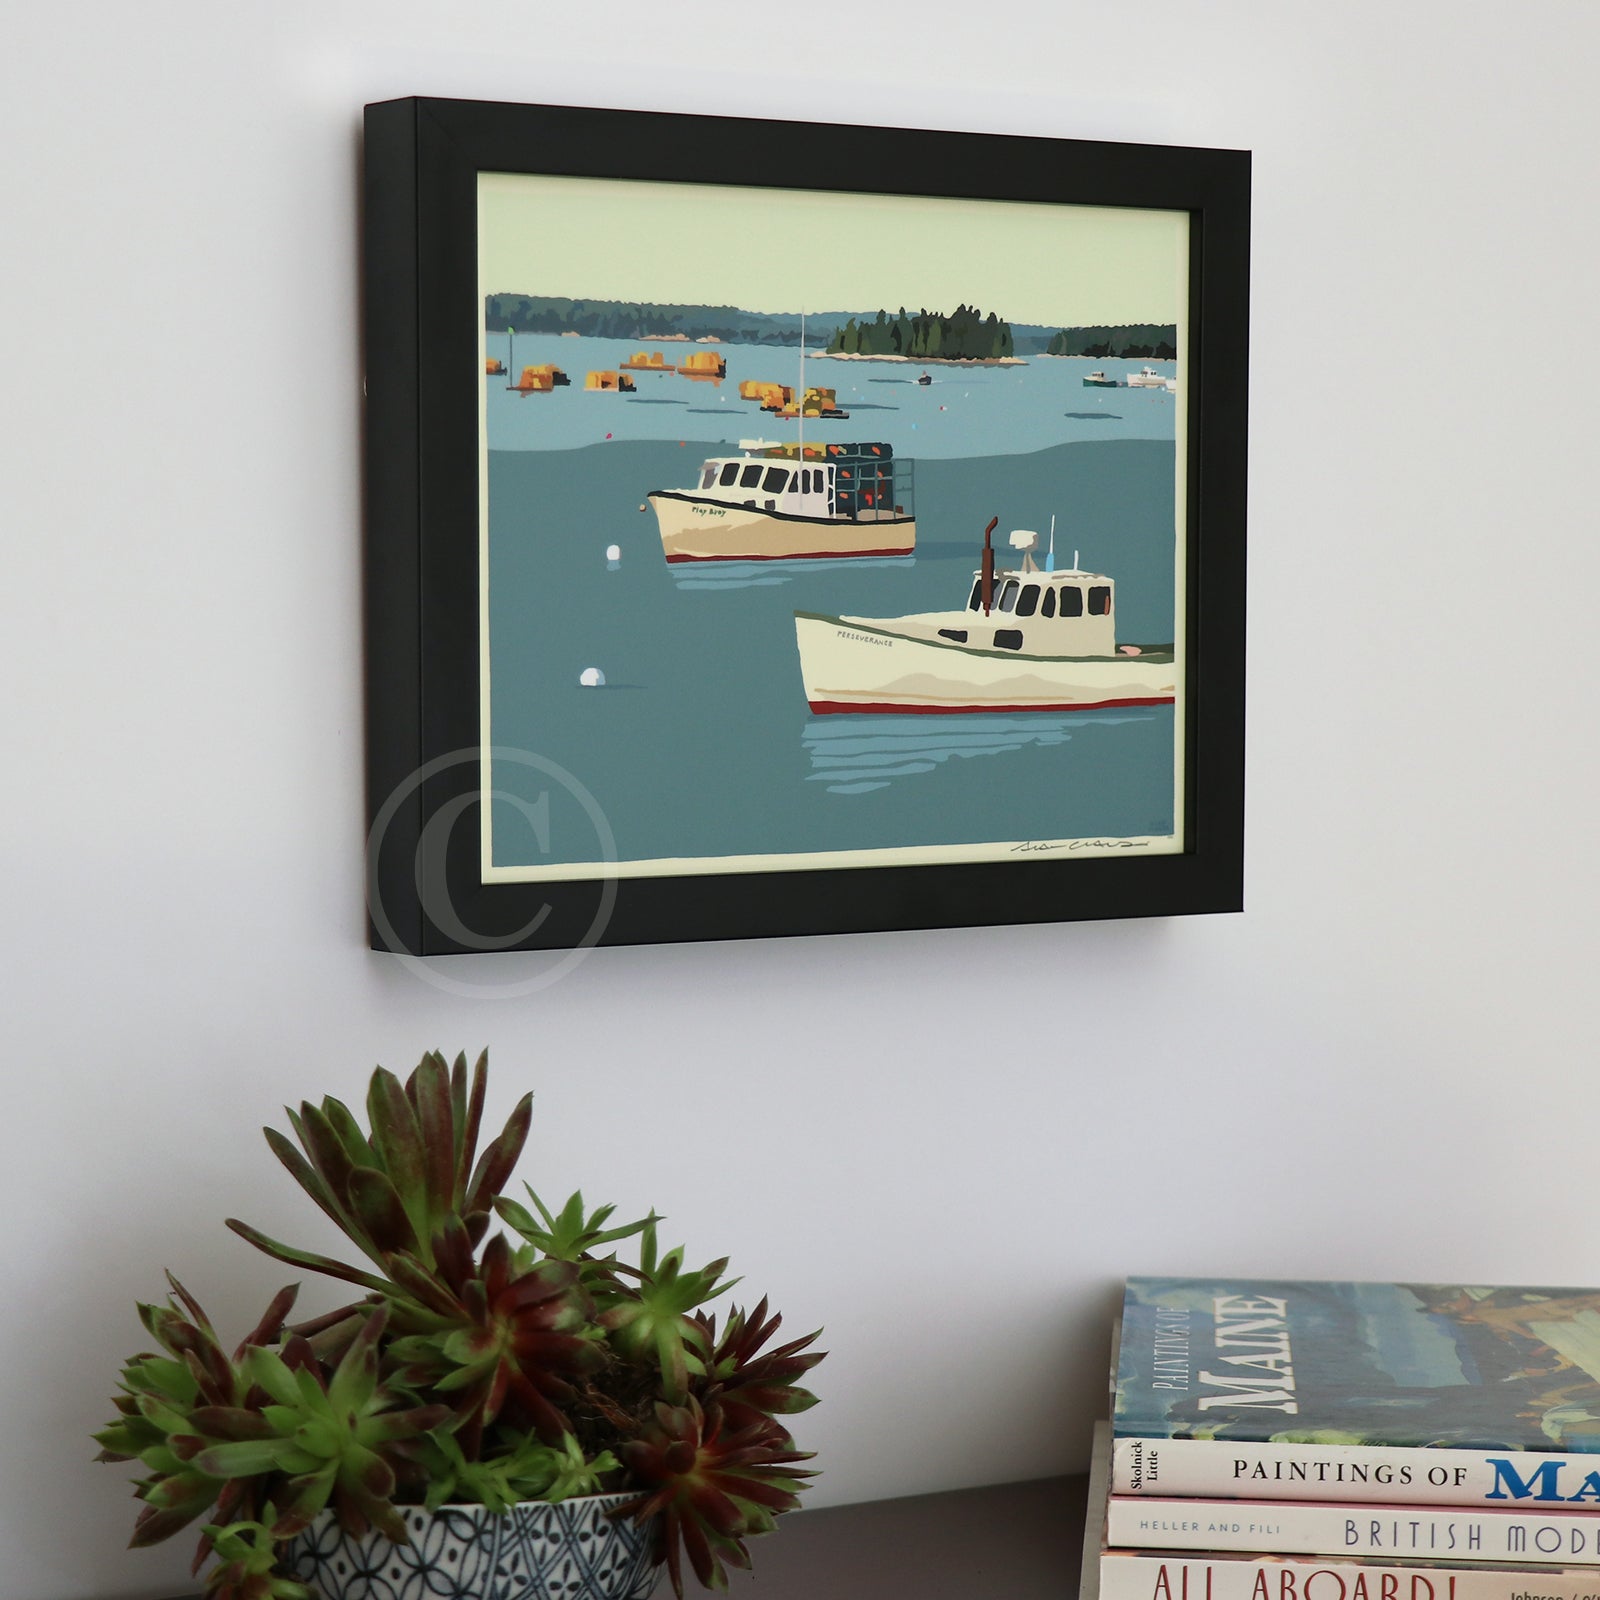 Lobster Boats in Friendship Art Print 8" x 10" Horizontal Framed Wall Poster By Alan Claude - Maine